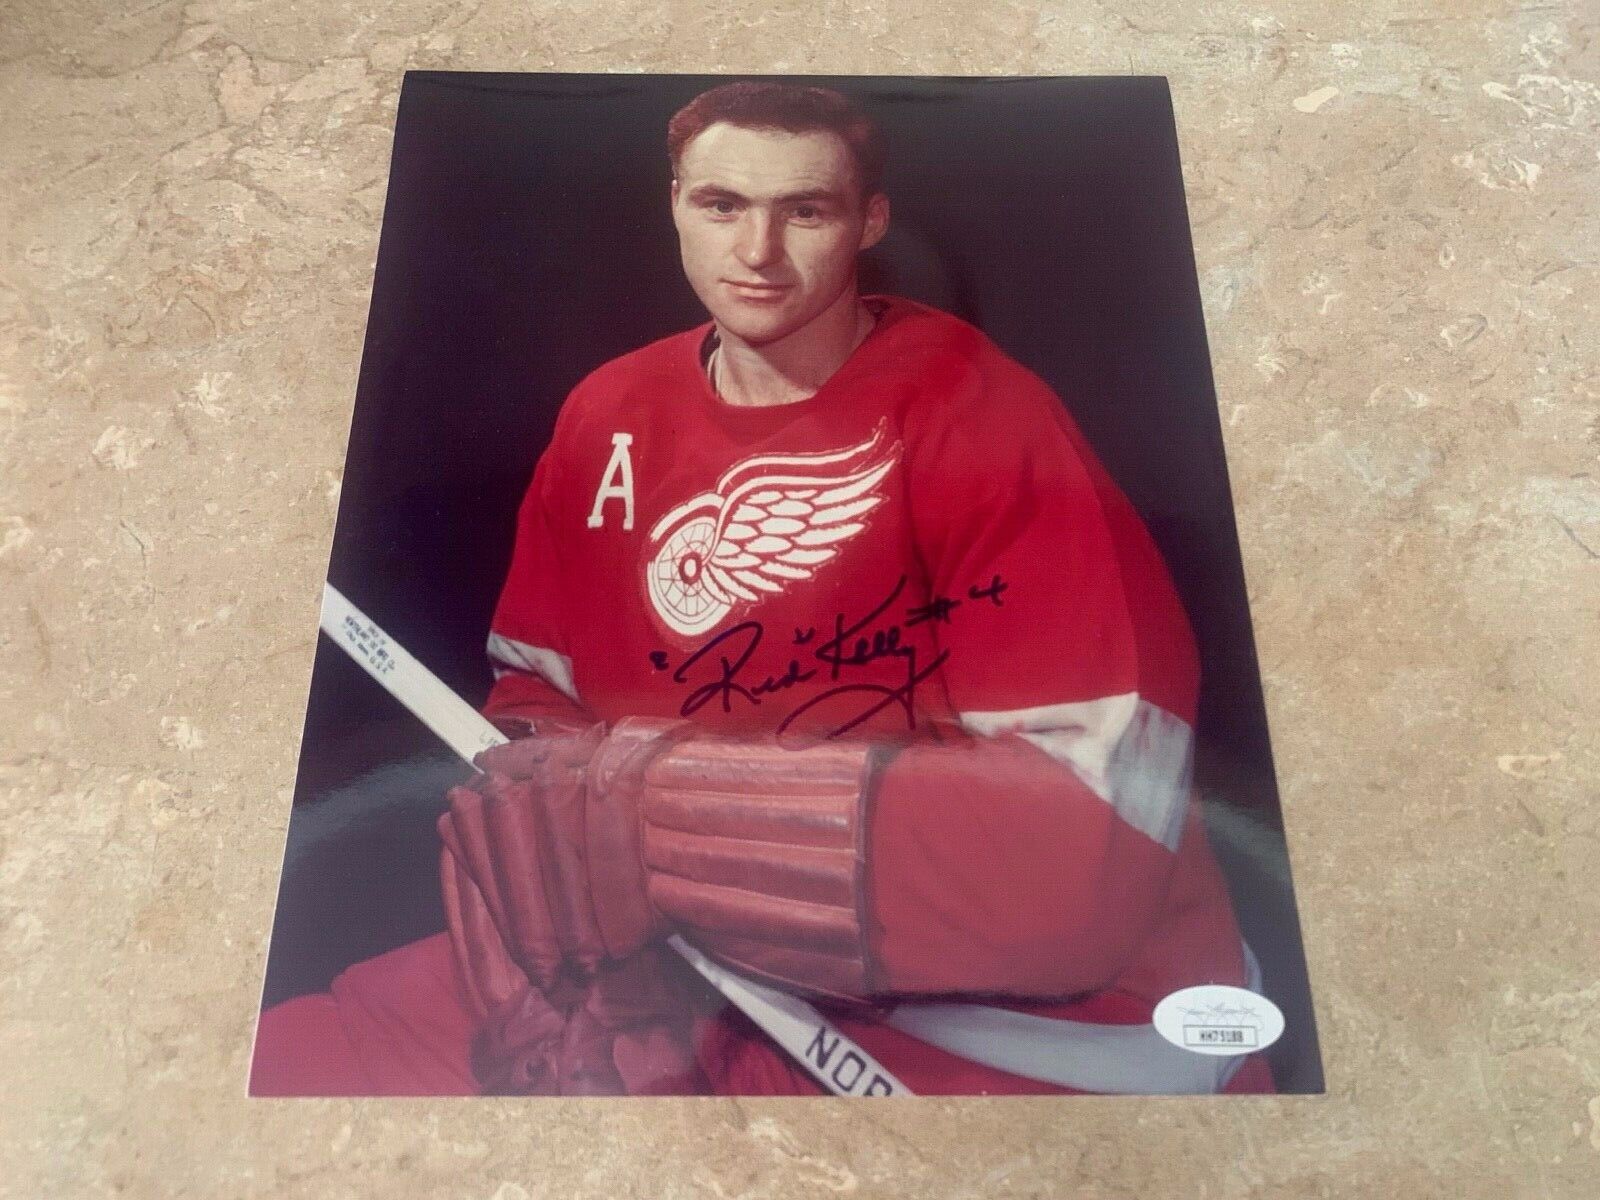 Red Kelly Detroit Red Wings Autographed 8x10 Hockey Photo JSA COA HH75188